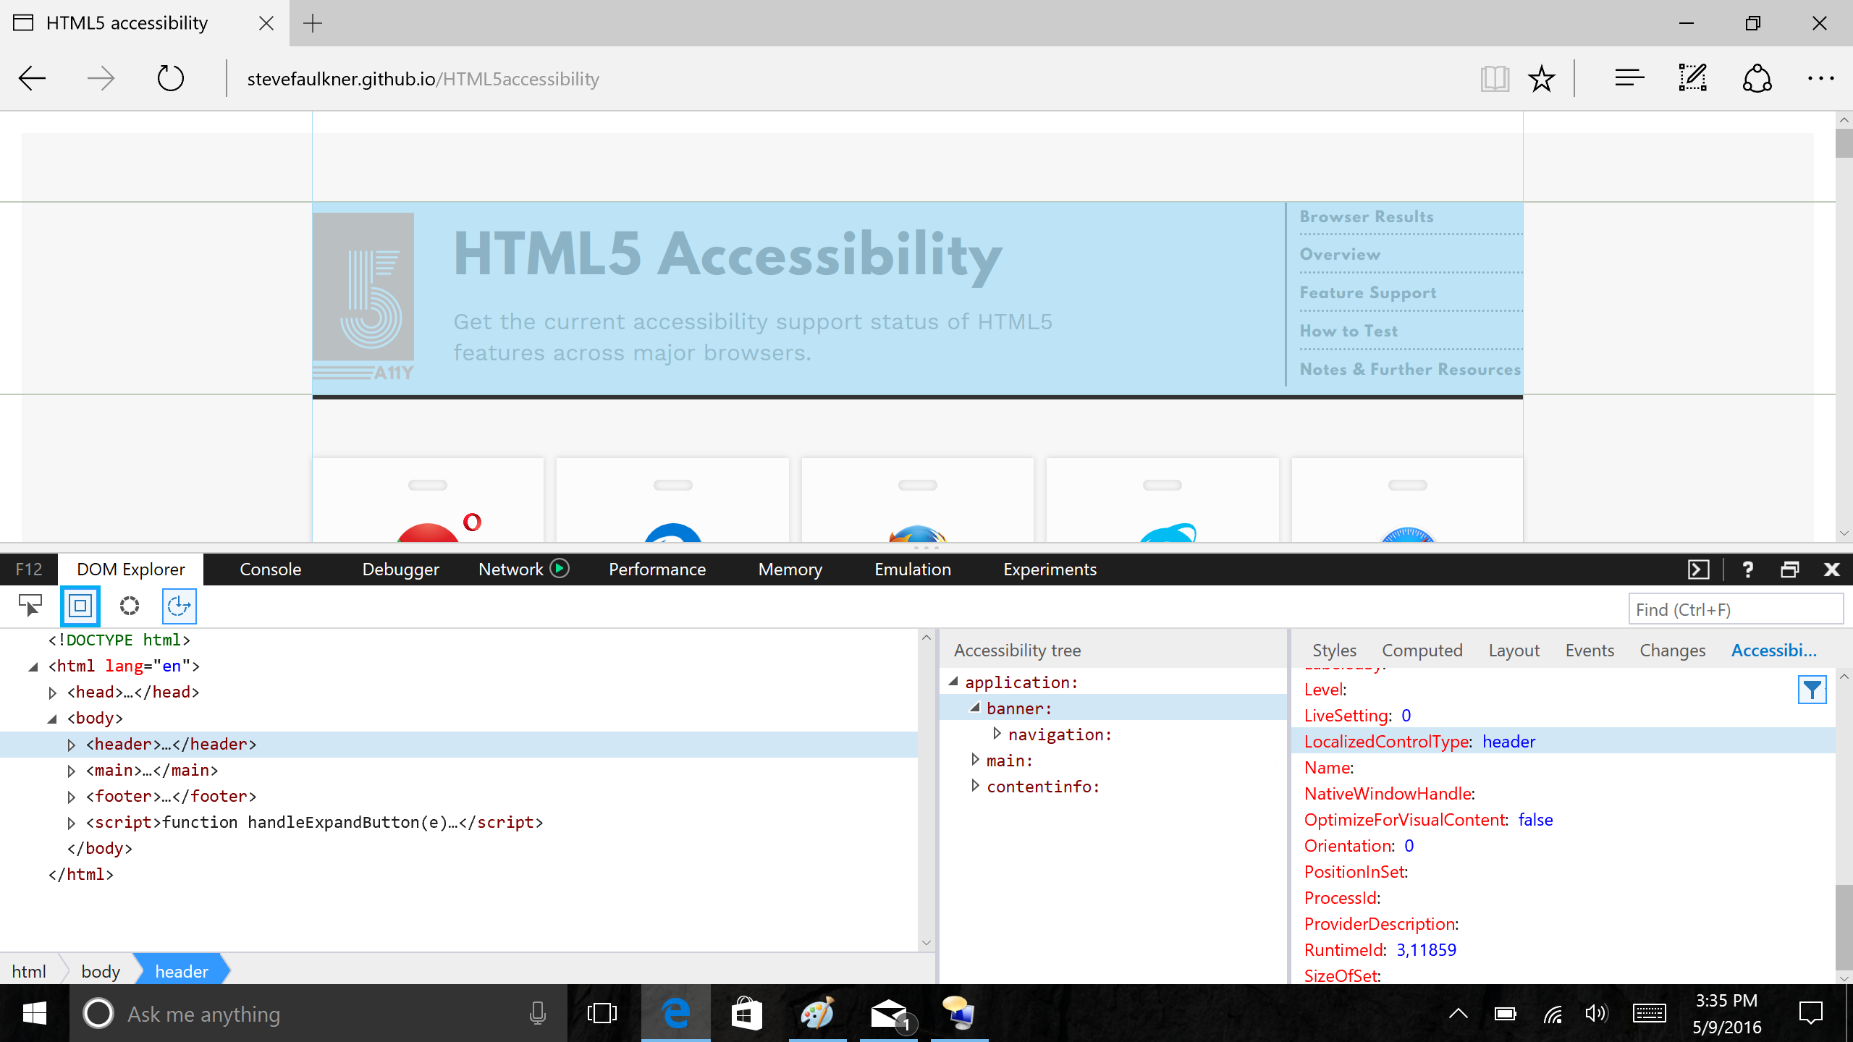 Screen capture showing the new Accessibility Tree view in F12 Developer Tools